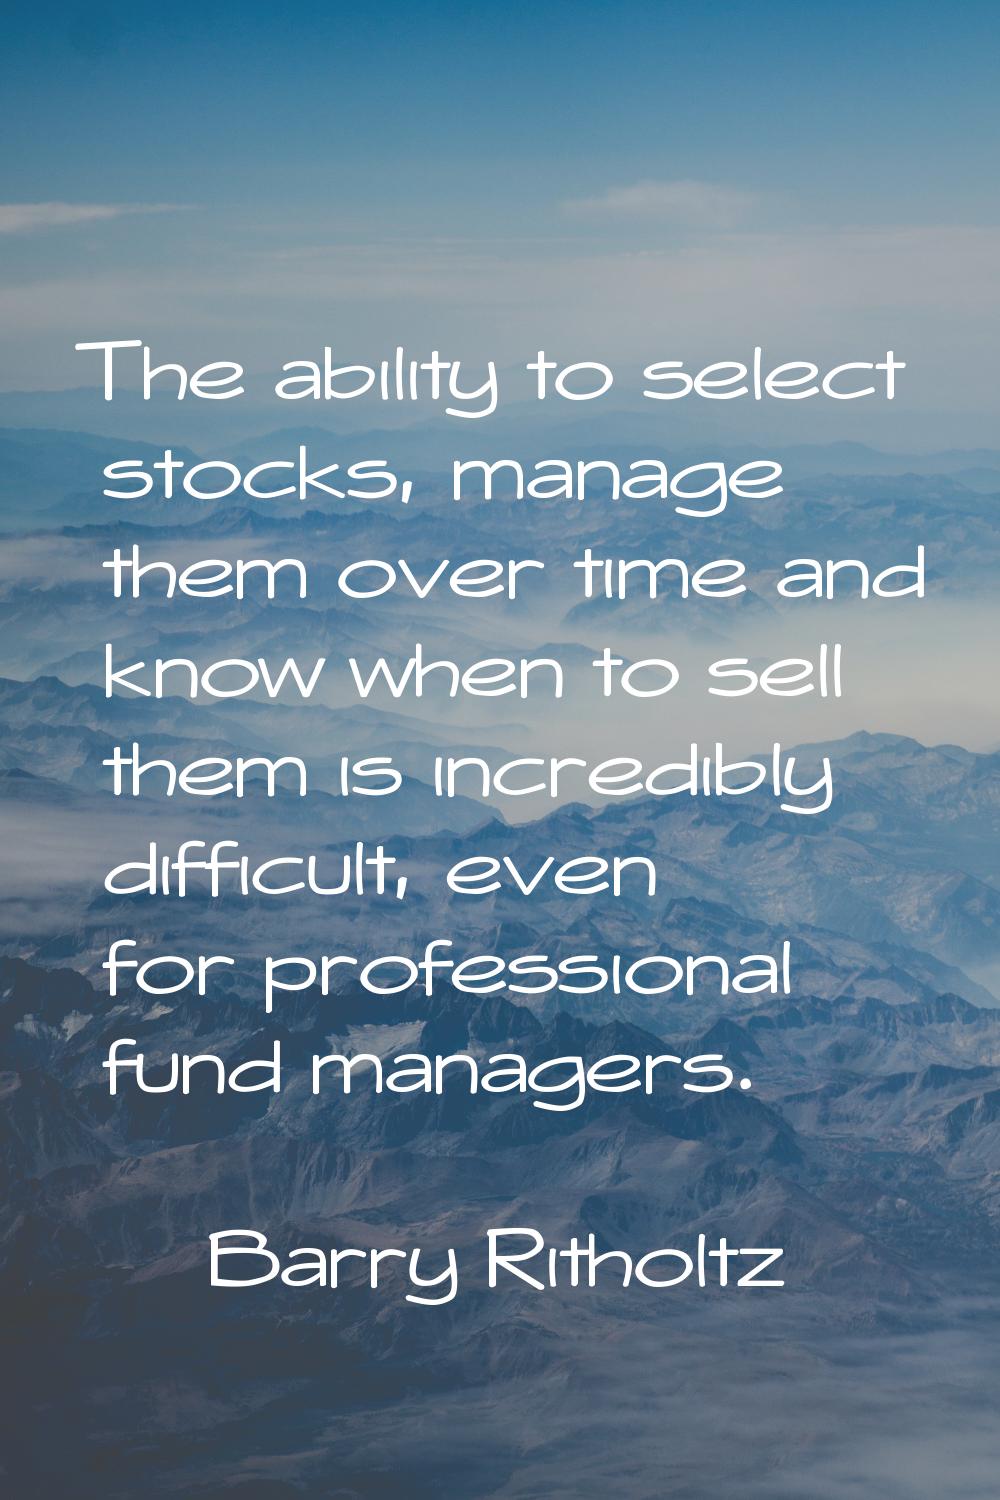 The ability to select stocks, manage them over time and know when to sell them is incredibly diffic